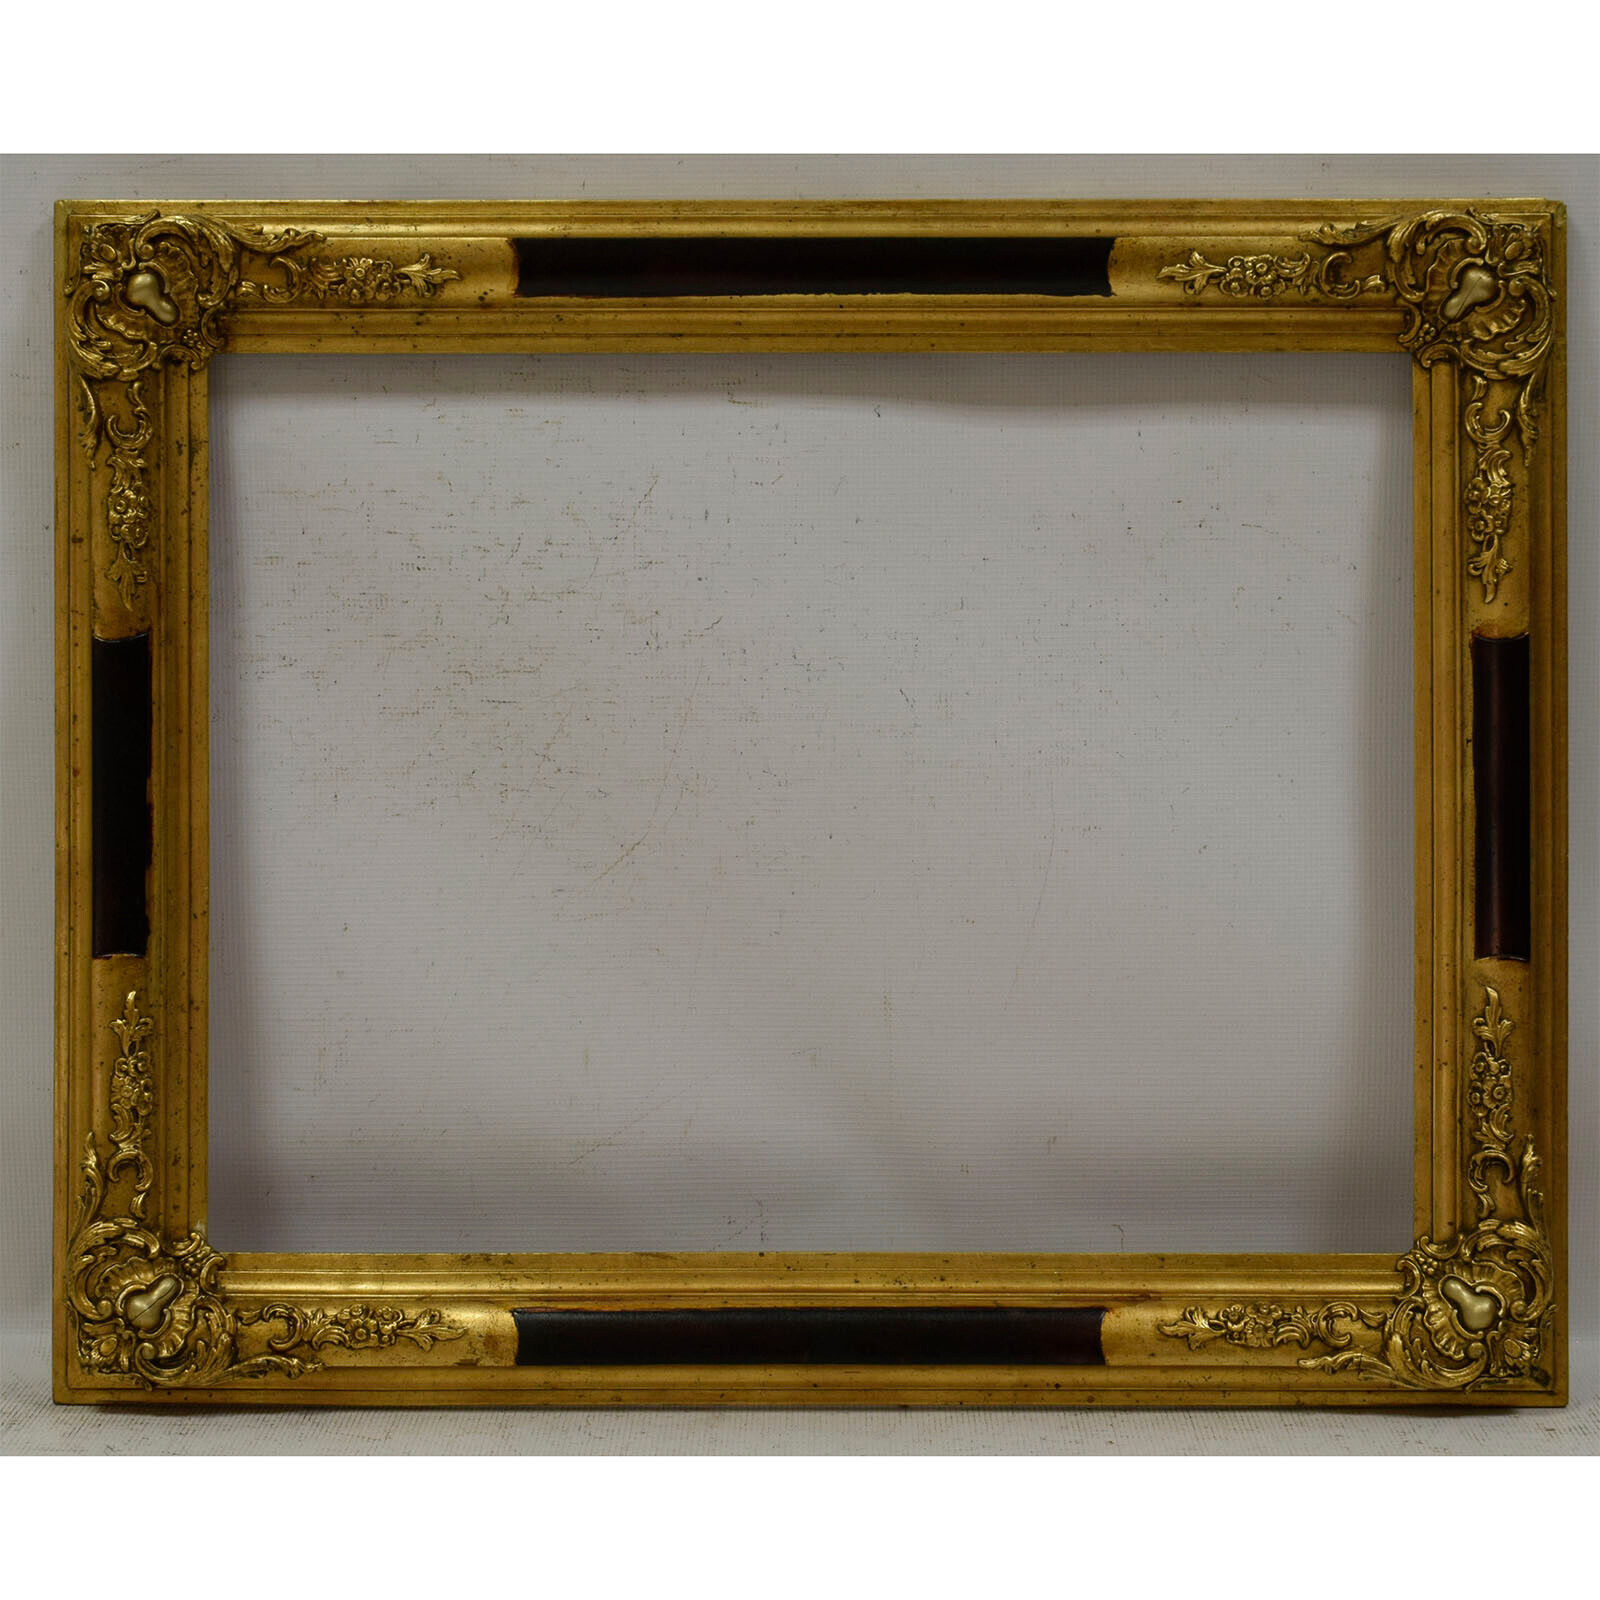 ca 1900 Old wooden frame Original condition Internal: 24,2x18,3 in